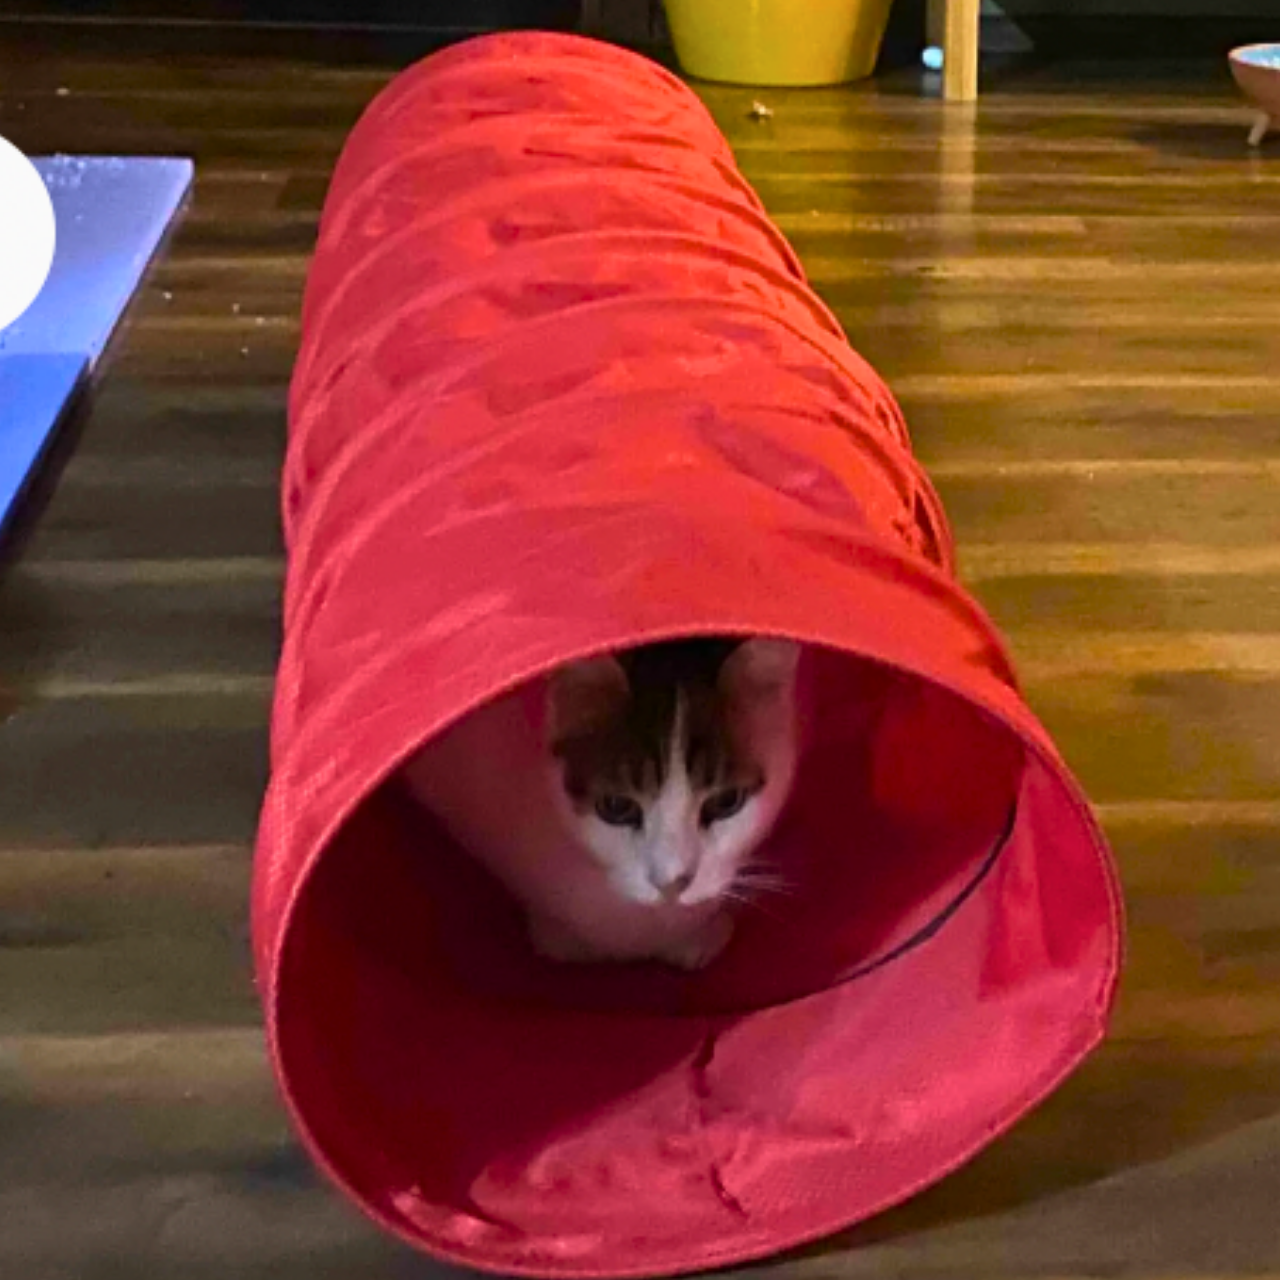 MyMeow Interactive Strengthened Red Long Tunnel 125cm